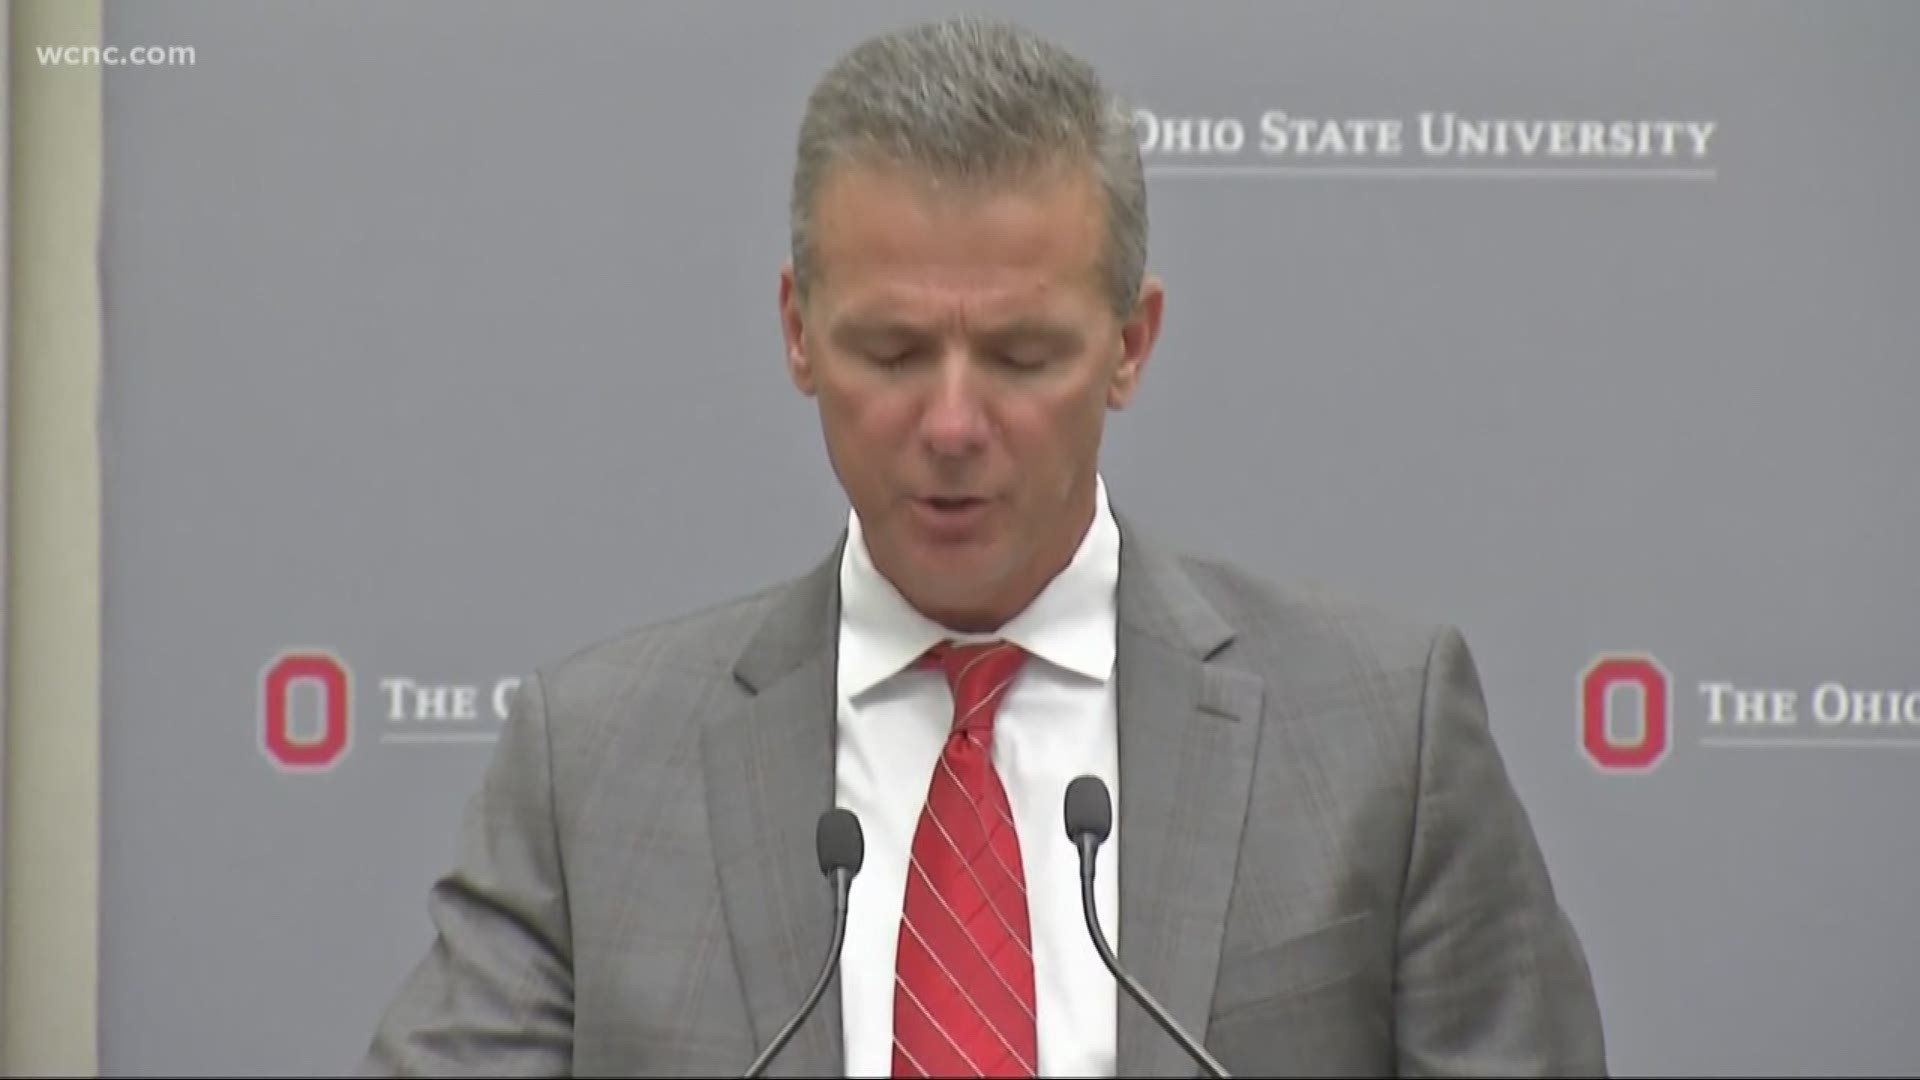 Ohio State football coach Urban Meyer was suspended for three games following an investigation into domestic violation allegations against a former assistant coach on his staff.